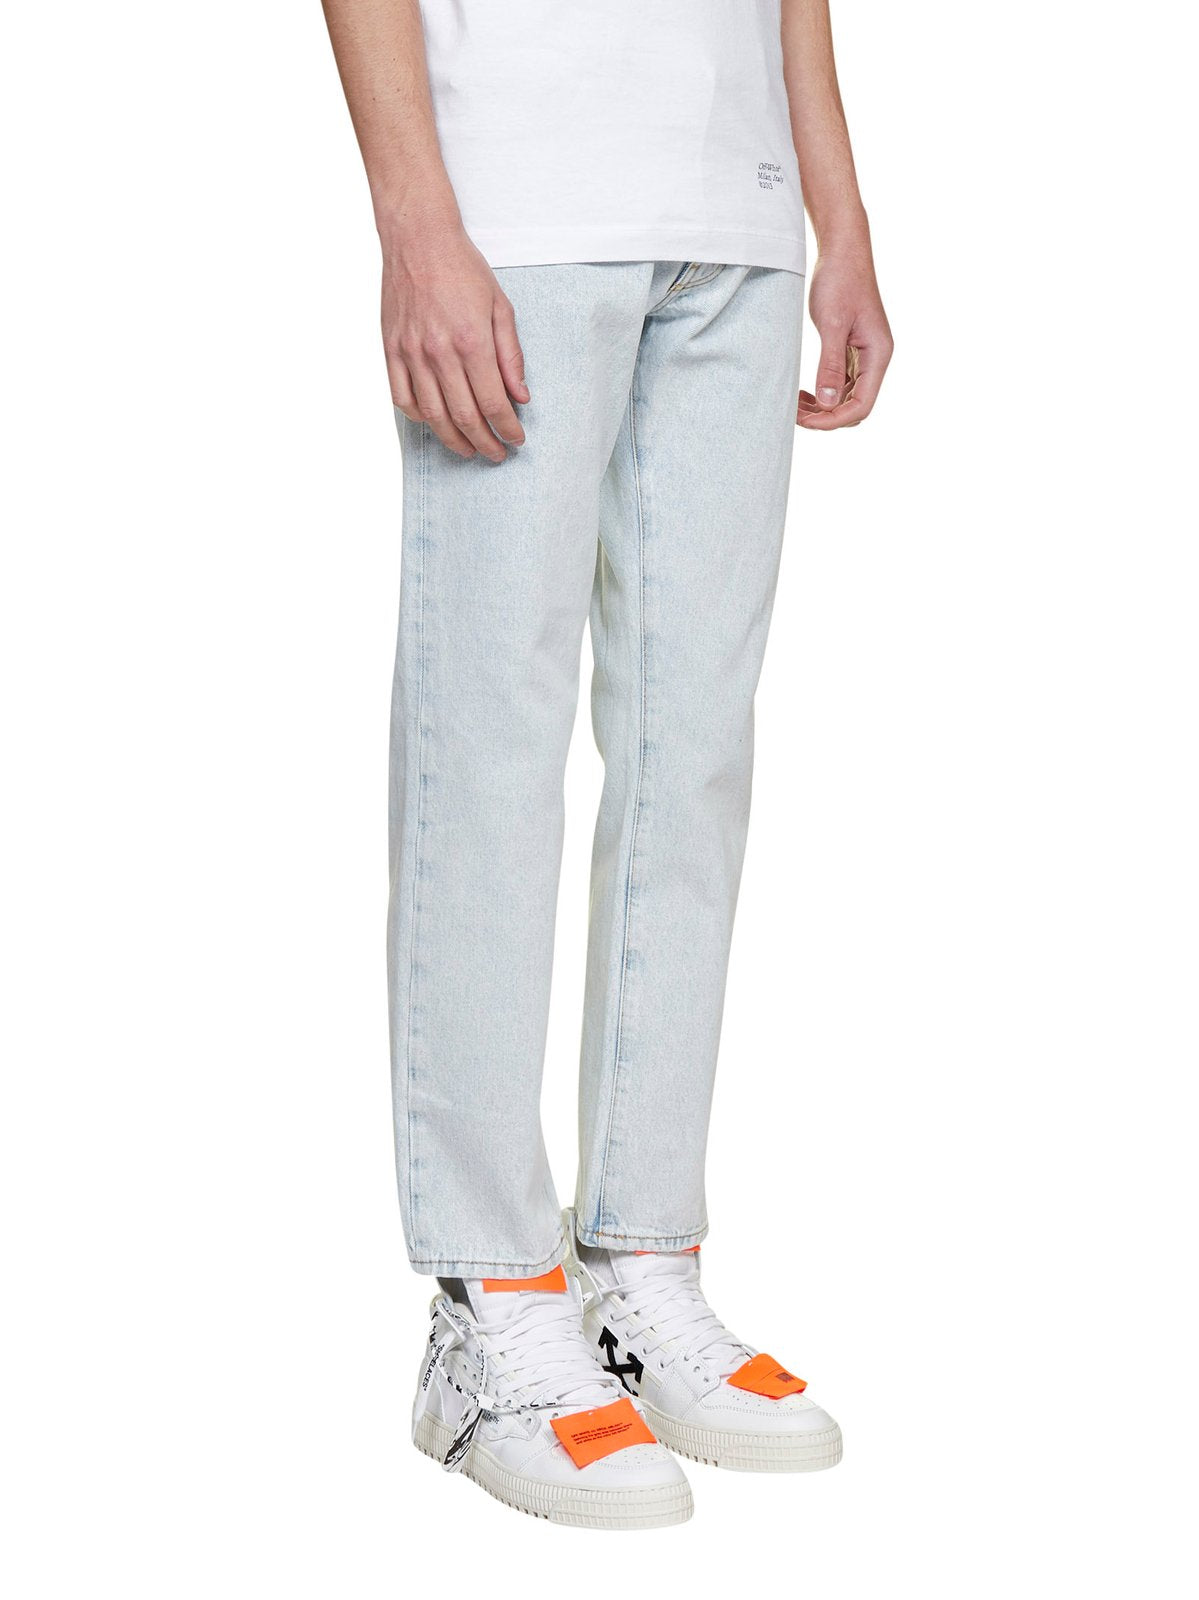 Off-White Diag Printed Slim Fit Jeans